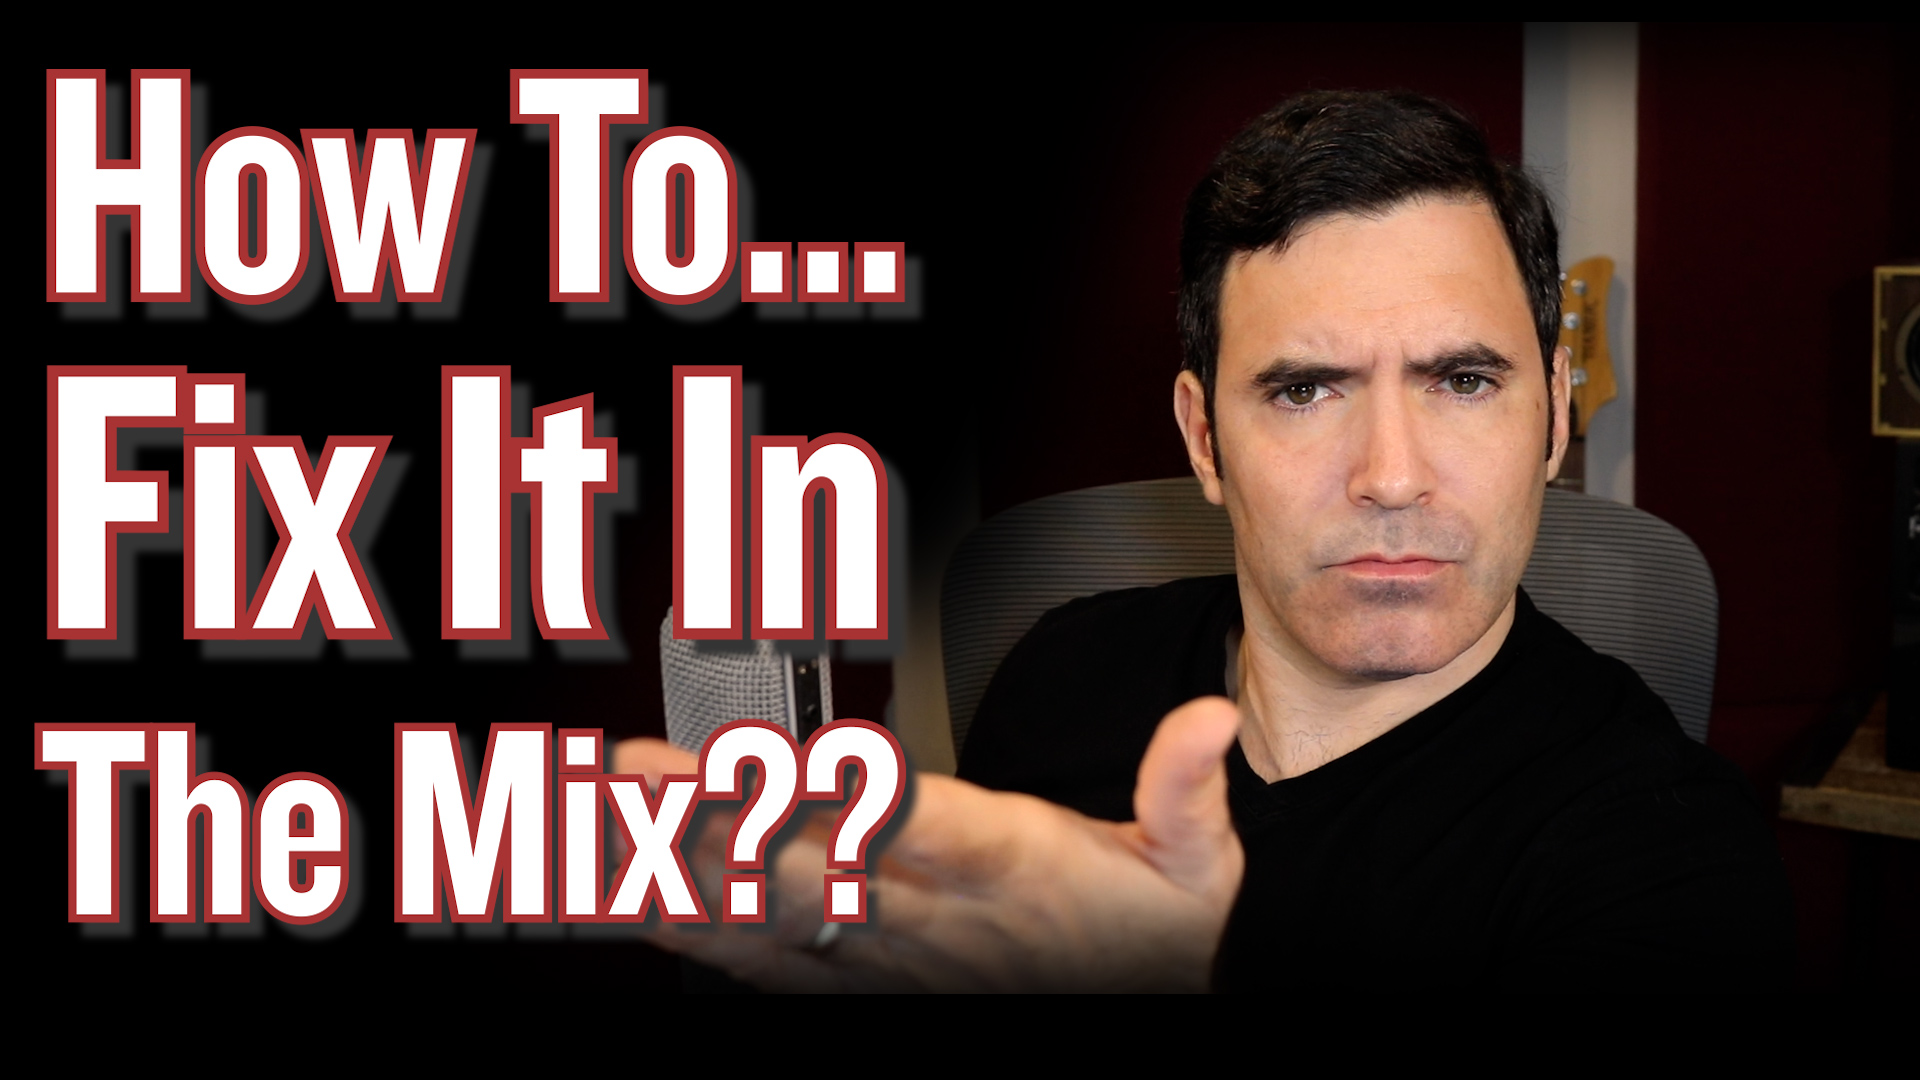 “Fixing It In The Mix”. If you’re gonna try, here’s how to do it.